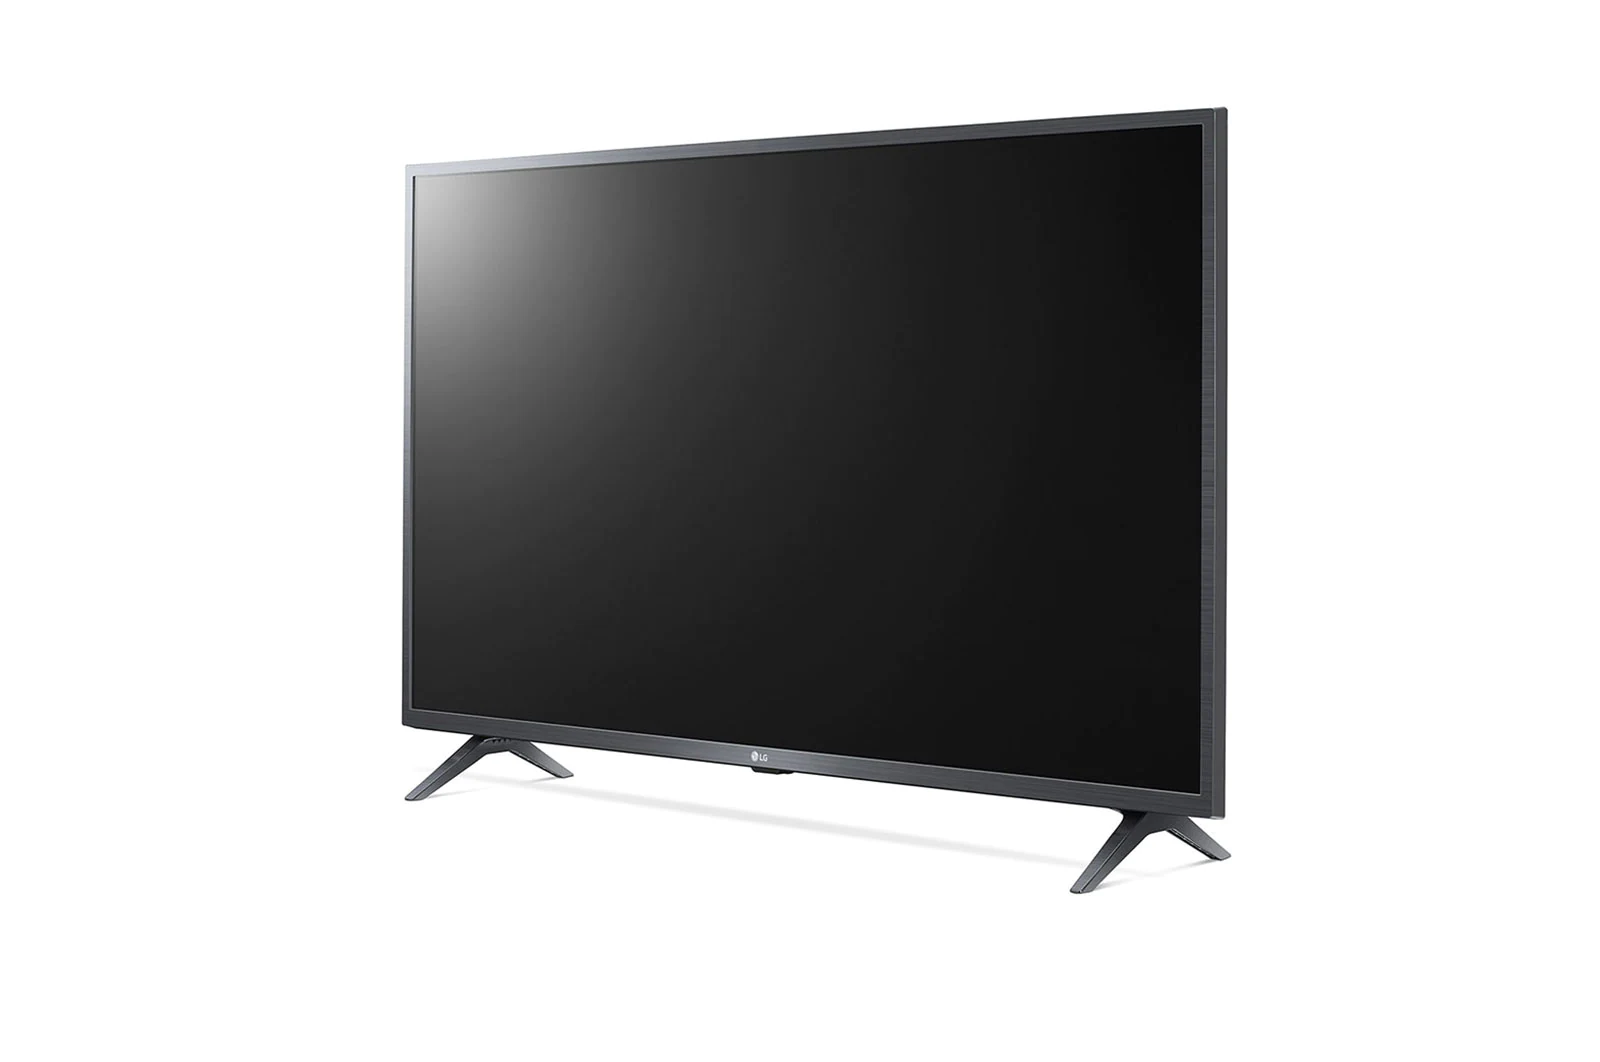 LG Smart TV, 43 inch, HDR, Full HD, Built-in Receiver, 43LM6370PVA